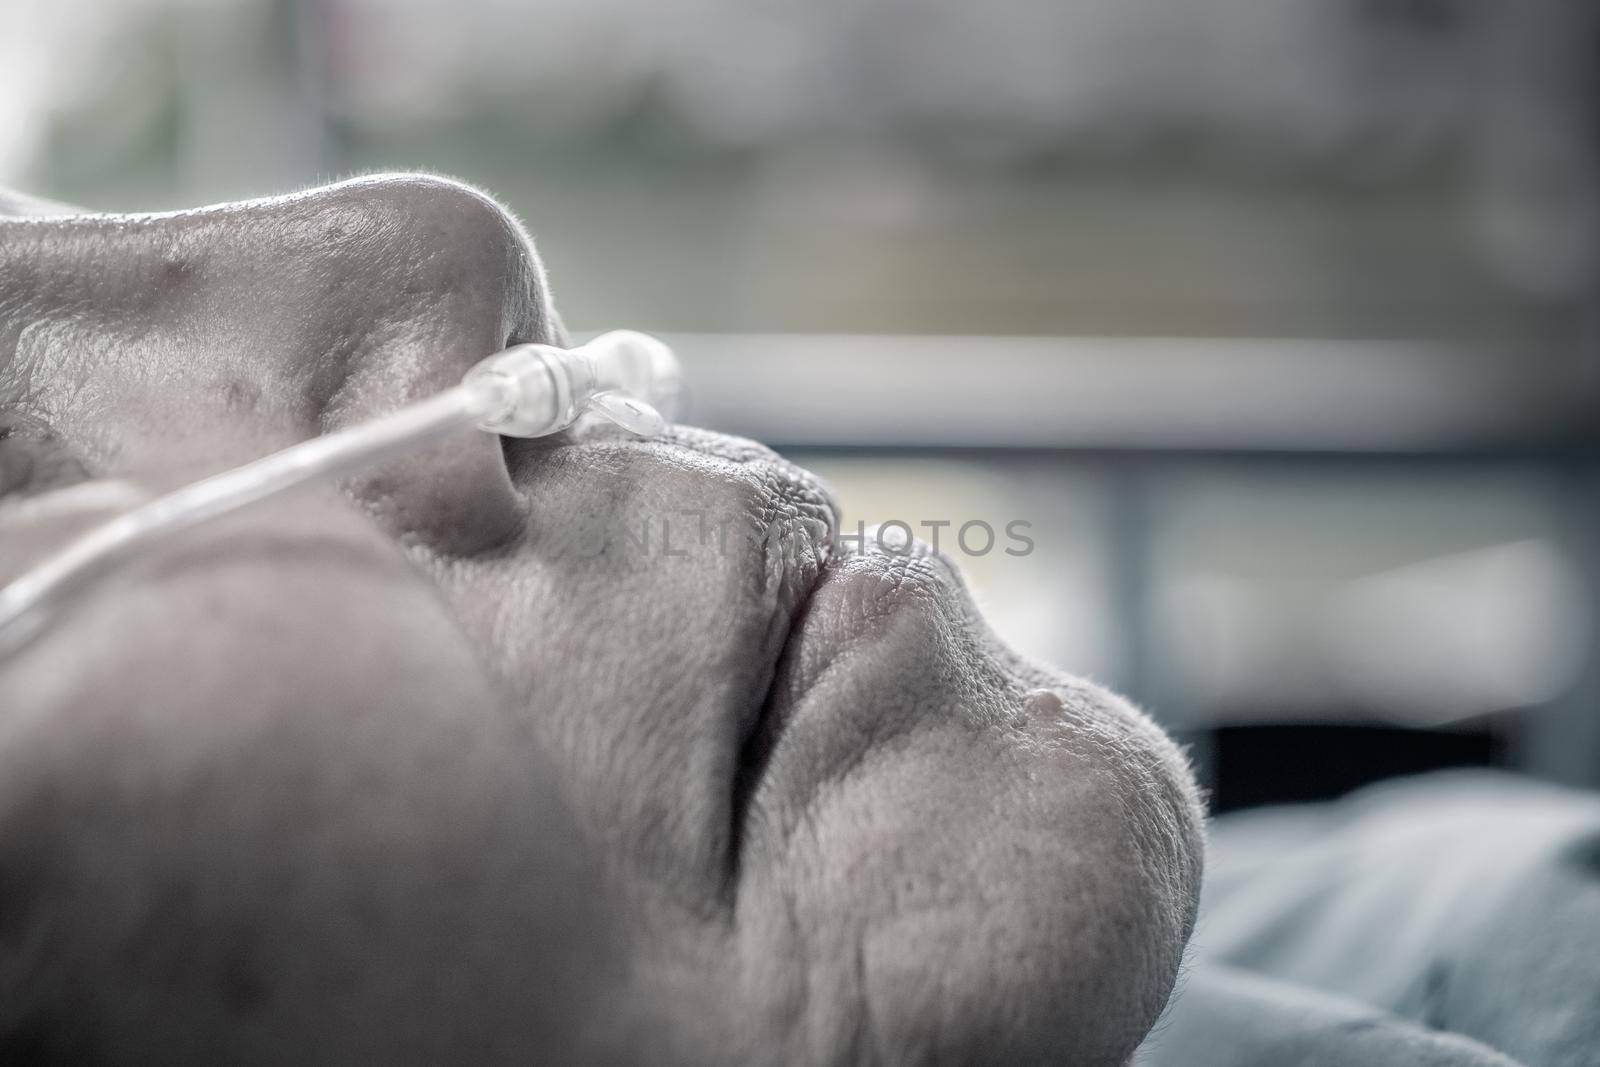 Elderly woman with nasal breathing tube to help with her breathing by toa55